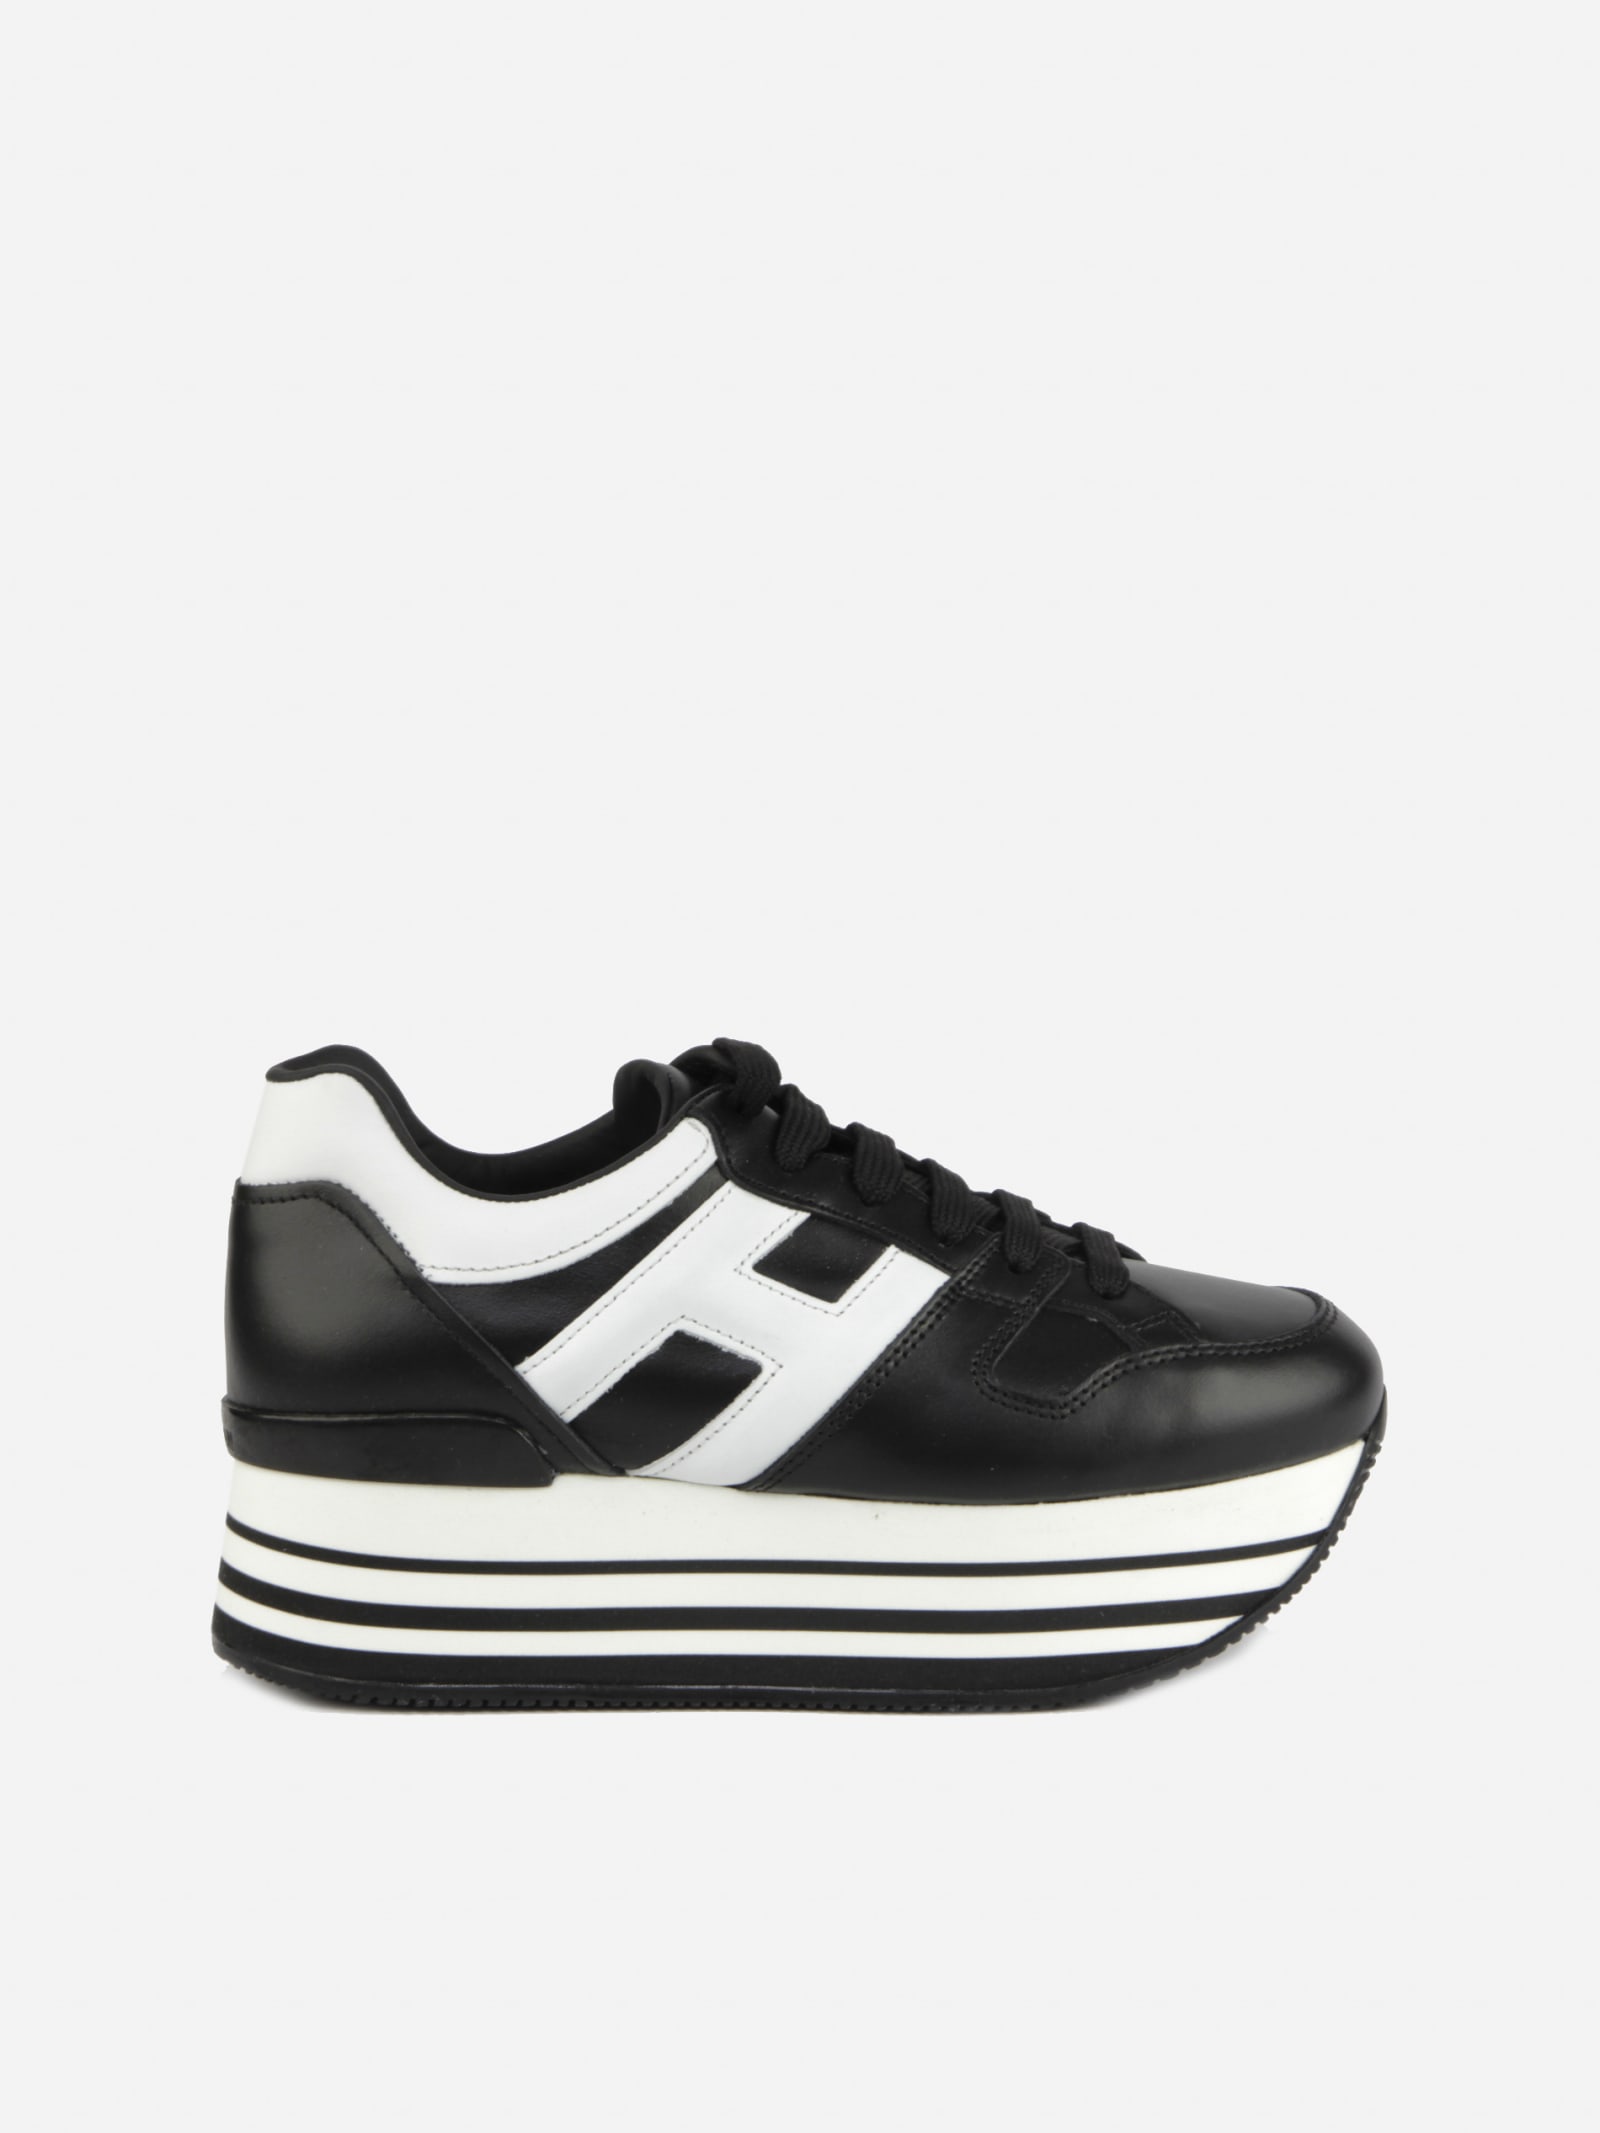 Hogan Maxi H222 Sneakers In Leather